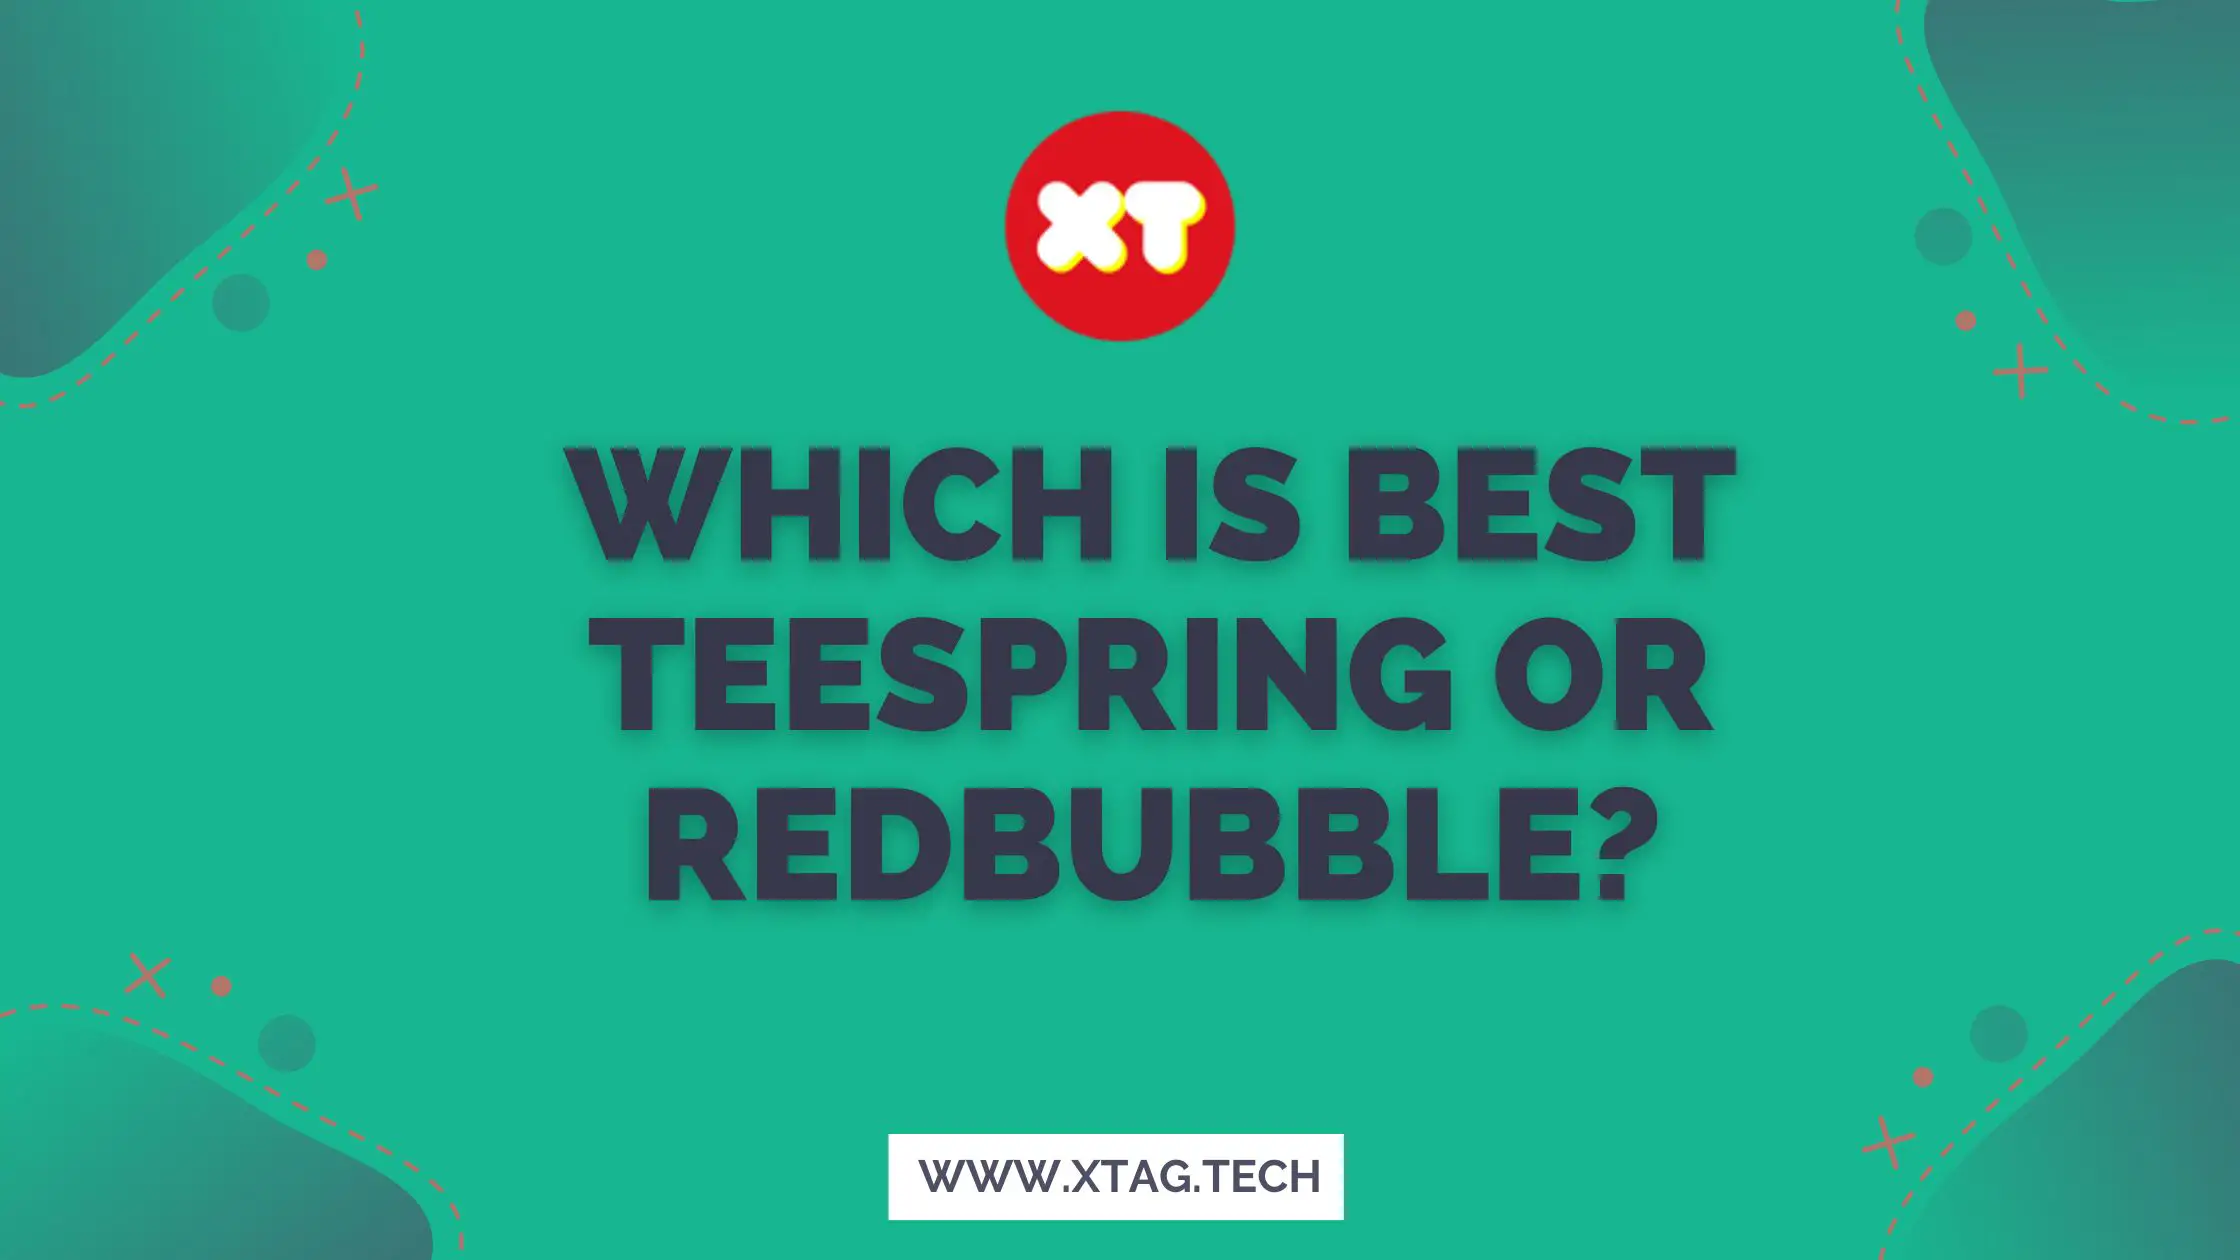 Which Is Best Teespring Or Redbubble?